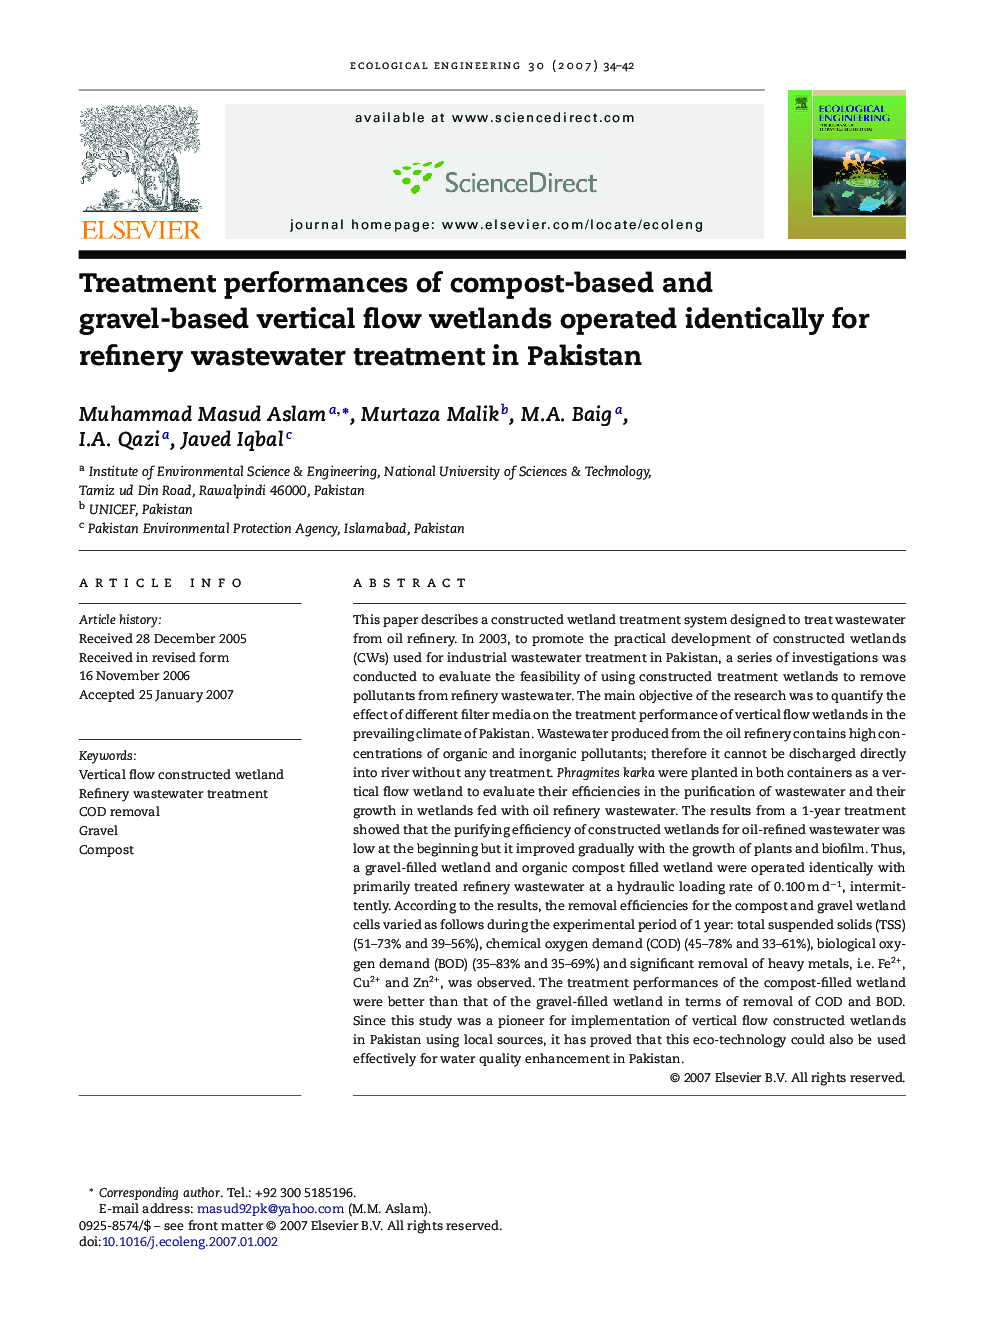 Treatment performances of compost-based and gravel-based vertical flow wetlands operated identically for refinery wastewater treatment in Pakistan